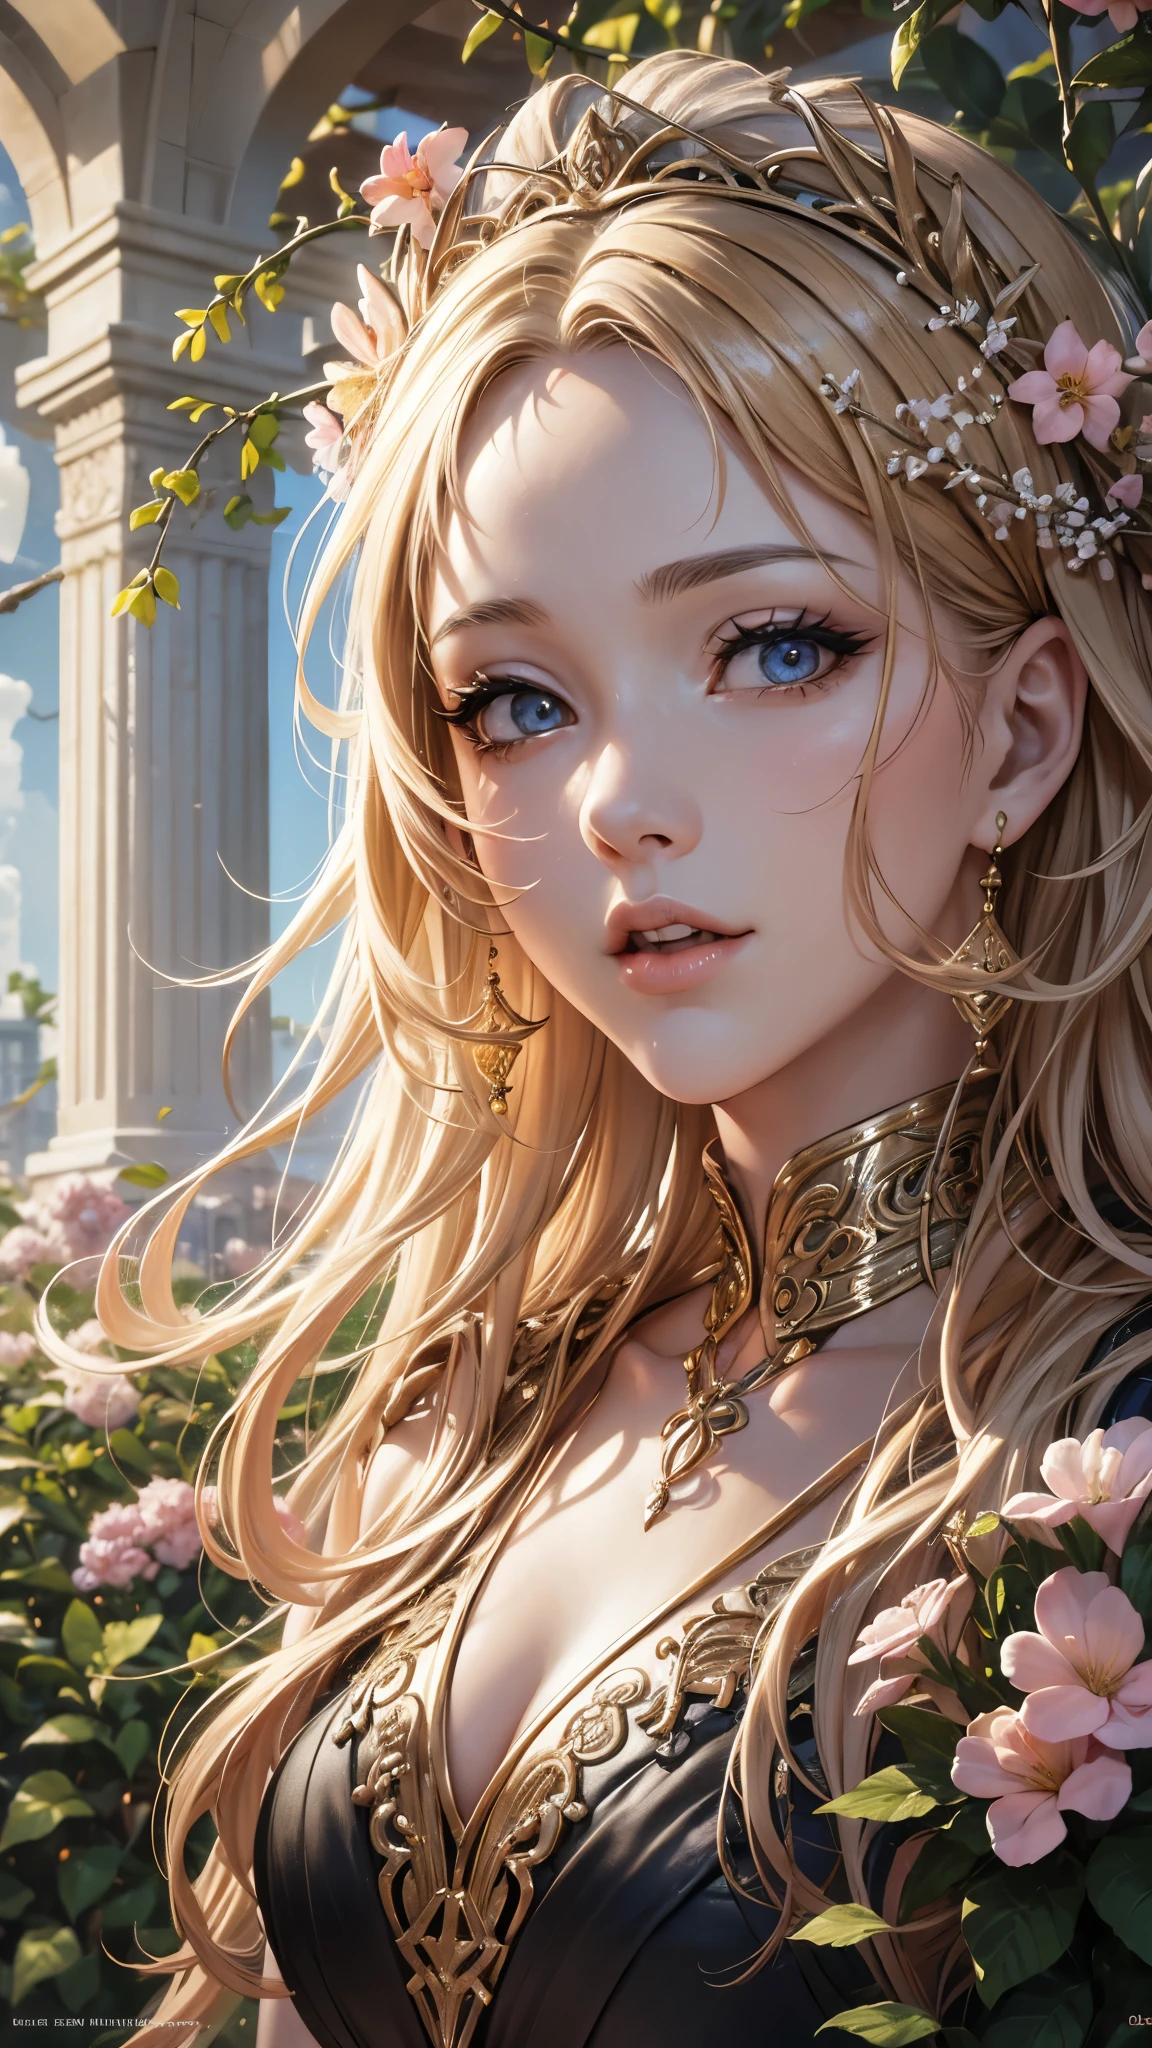 (best quality,highres,8k,resolution:1.2),ultra-detailed,extremely detailed face and body,beautiful detailed eyes,beautiful detailed lips,long eyelashes,highly realistic facial features,impeccable skin texture,tall figure,long legs,graceful posture,confident expression,stylish outfit,beautifully flowing hair,garden background,soft natural lighting,vivid colors,sharp focus,photorealistic style,impressive artwork.